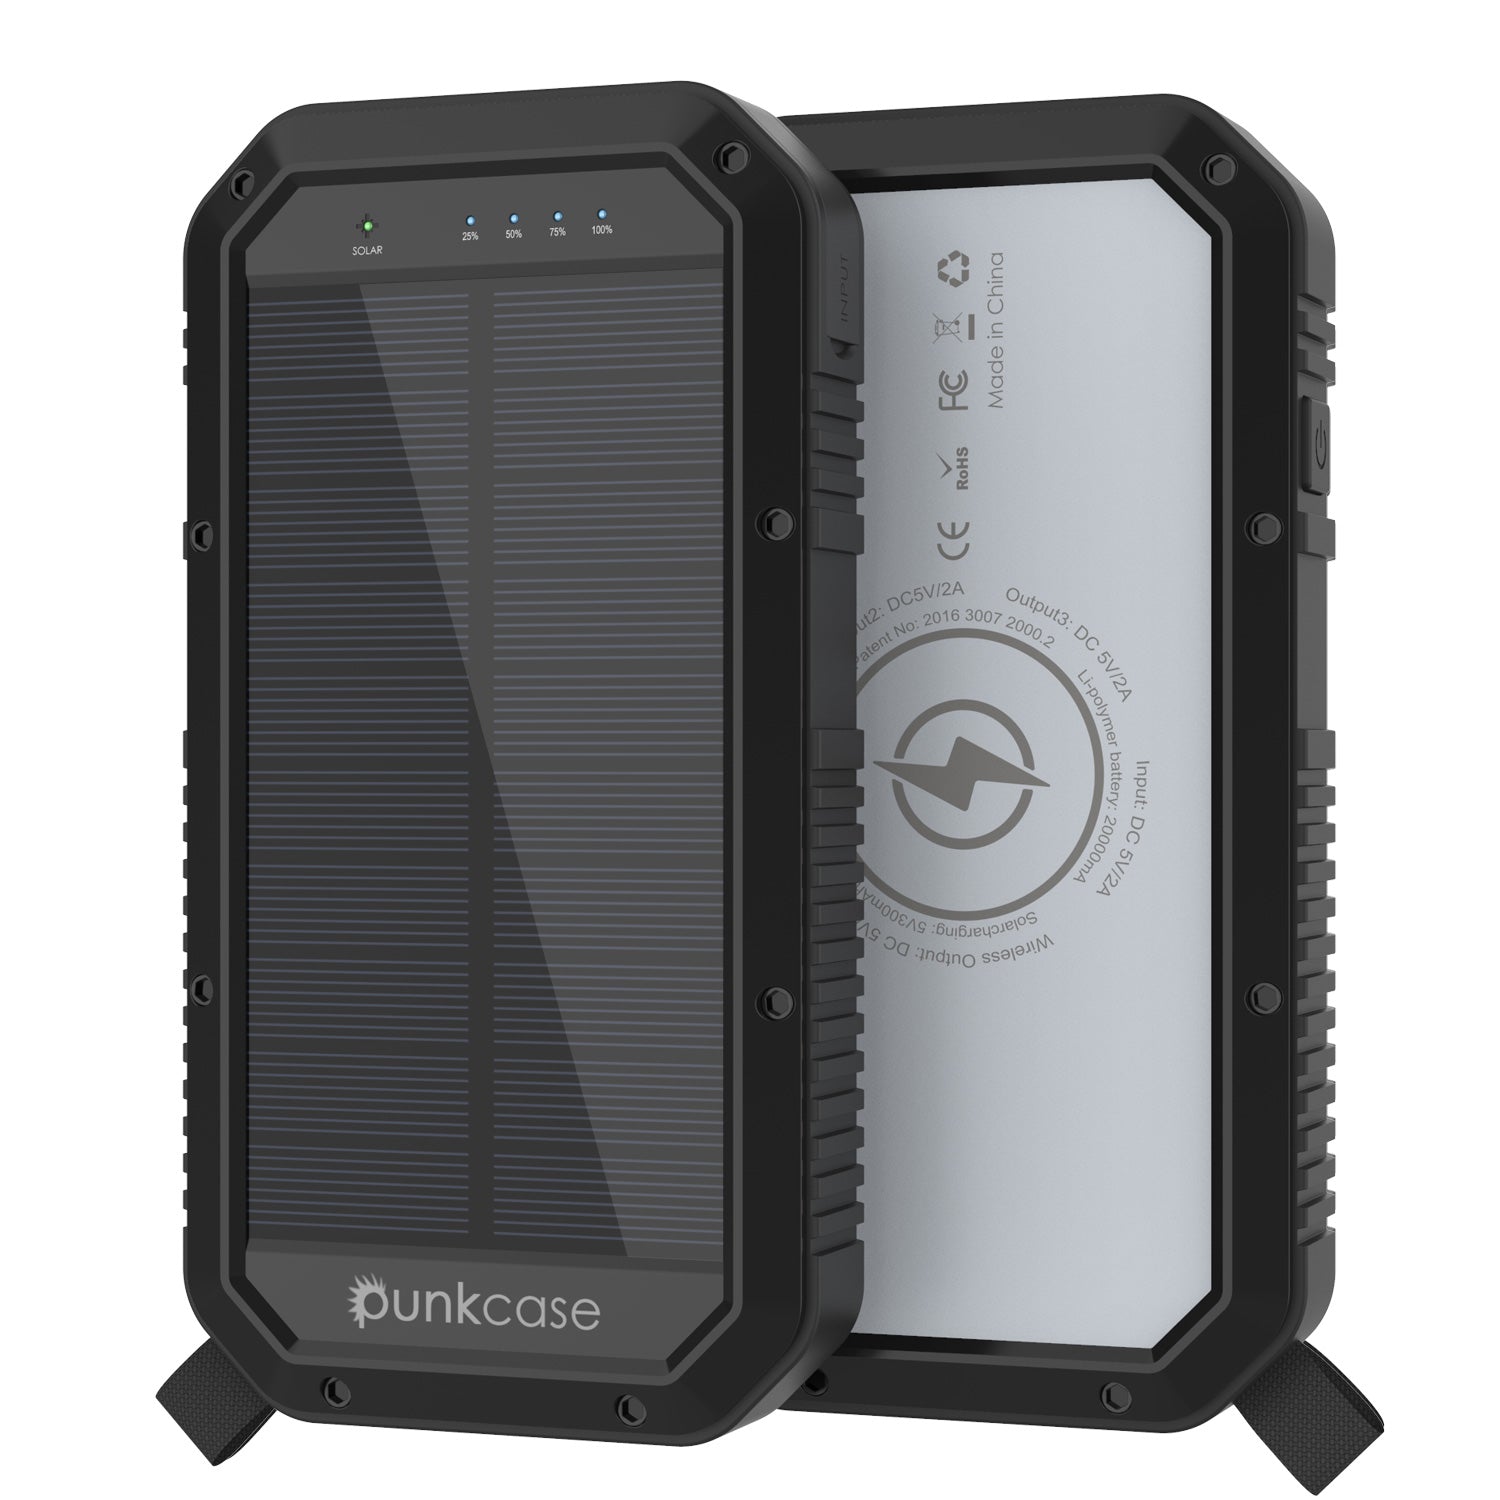 Water Resistant Solar Power Bank/Wireless Charger - 20000mAh